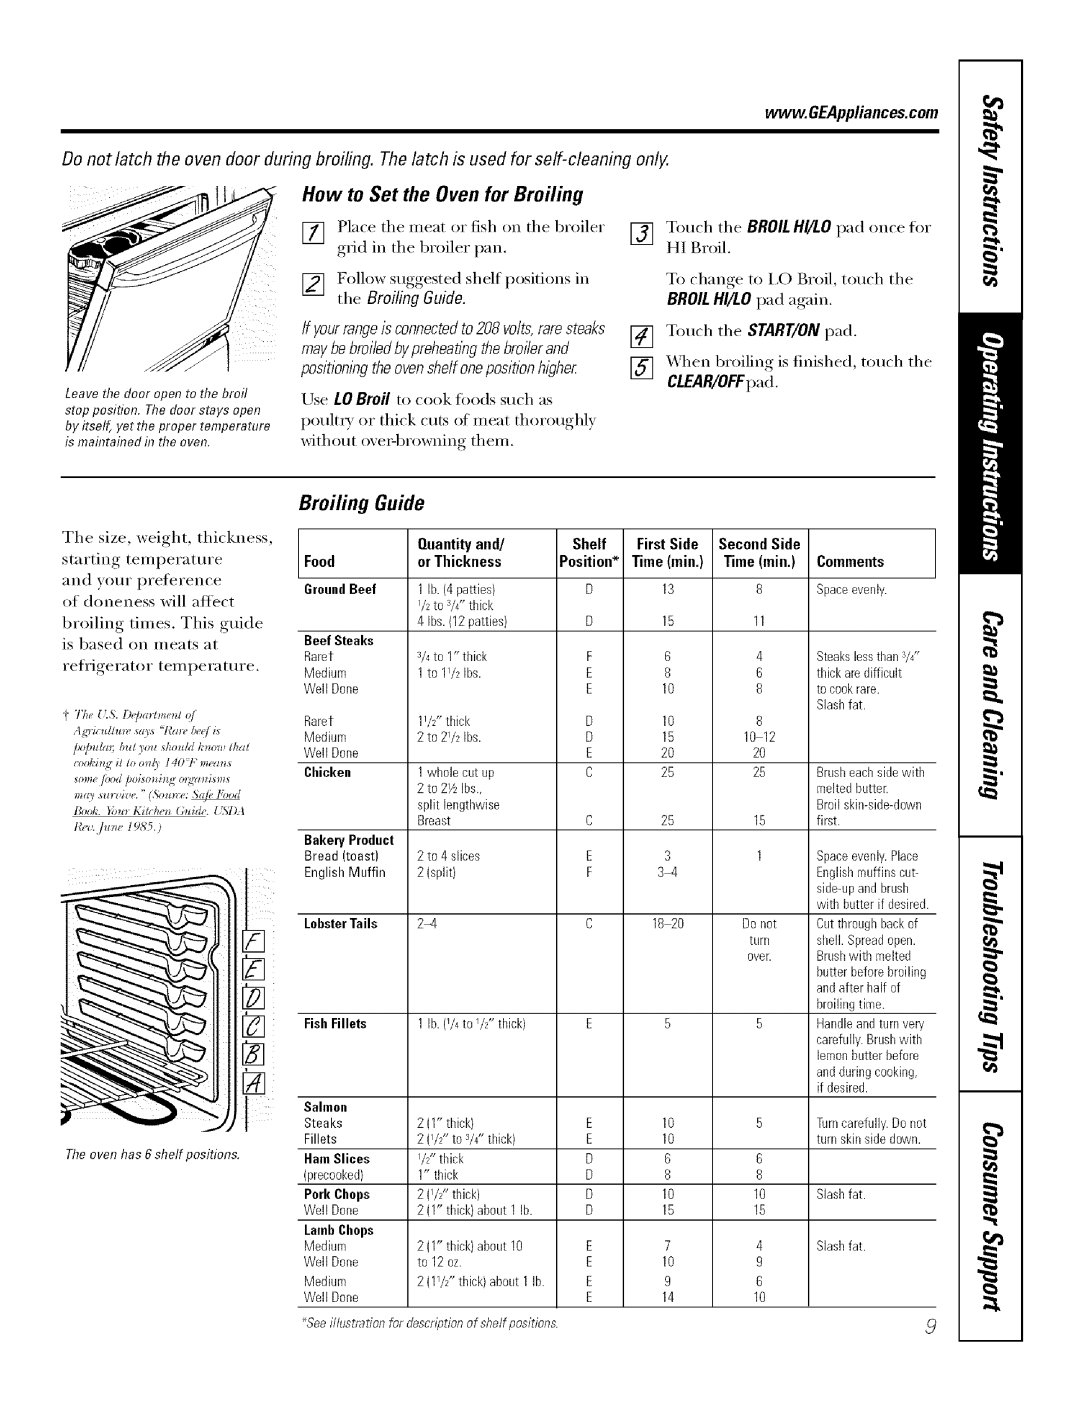 GE Range Broiling Guide, How to Set the Oven for Broiling, BROIL HI/LO pad again, START/ON pad, CLEAR/OFFpad, Quantityand 